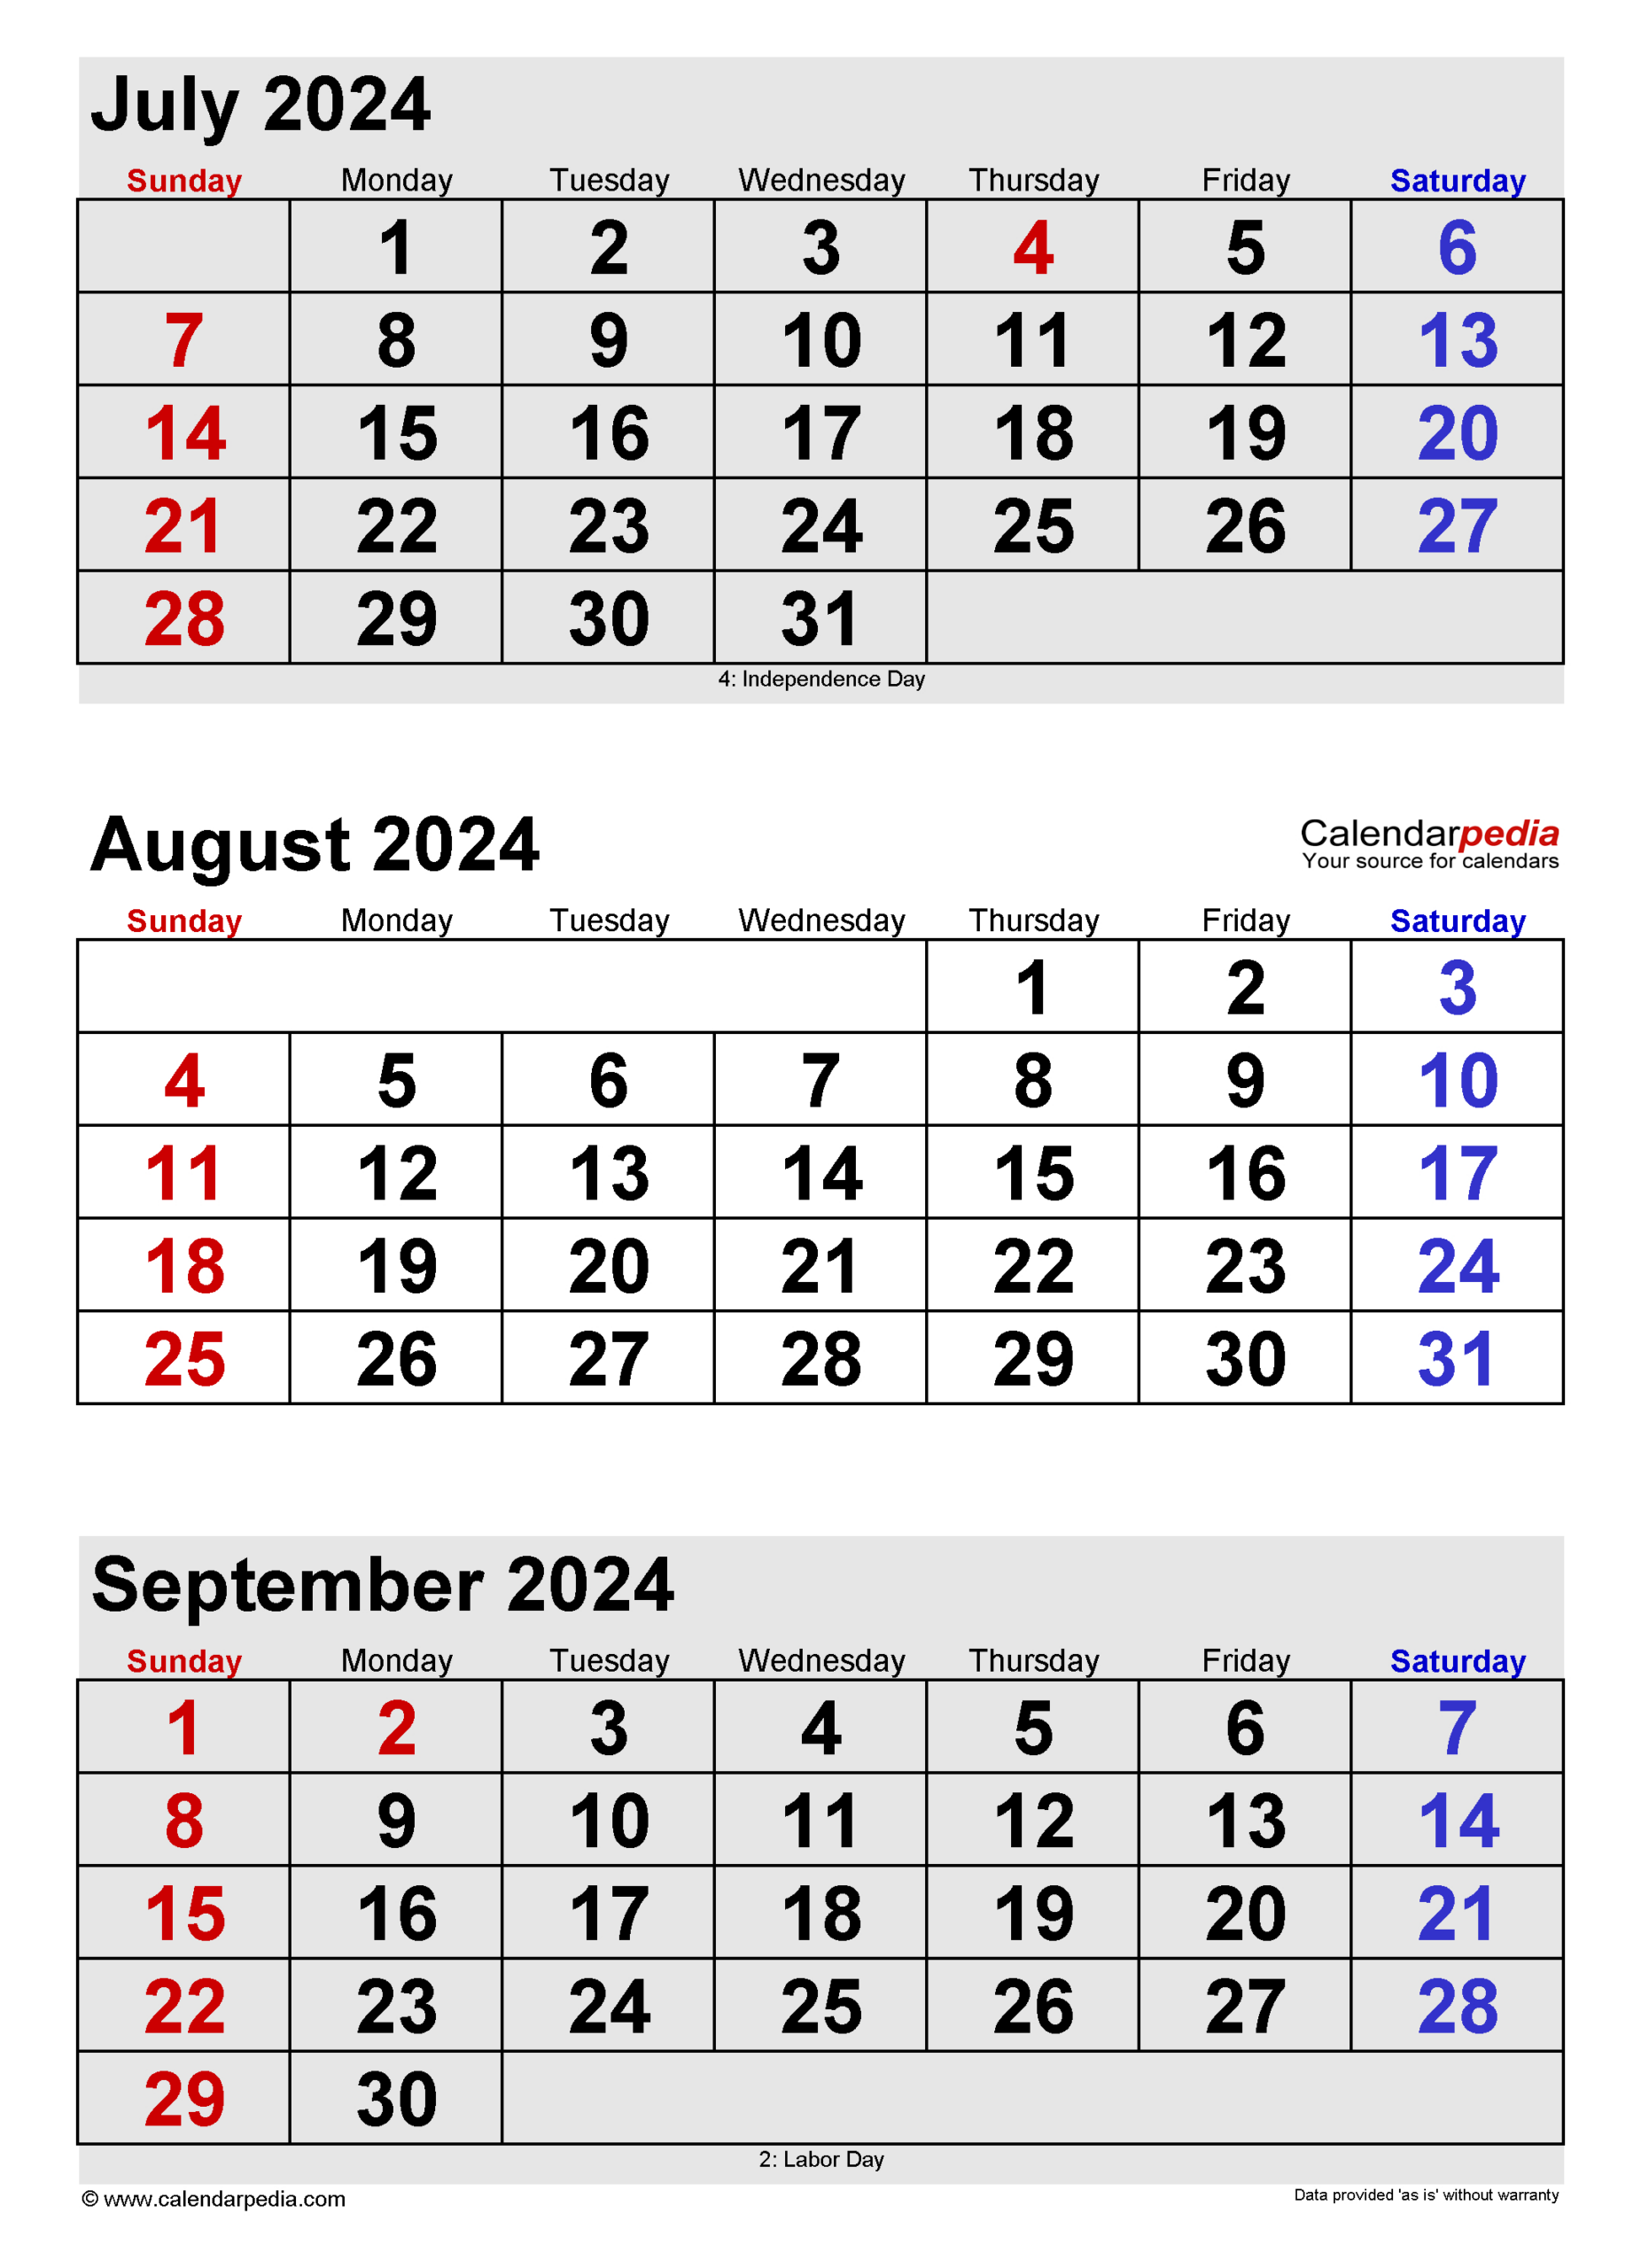 August 2024 Calendar | Templates For Word, Excel And Pdf intended for July Aug Sept Calendar 2024